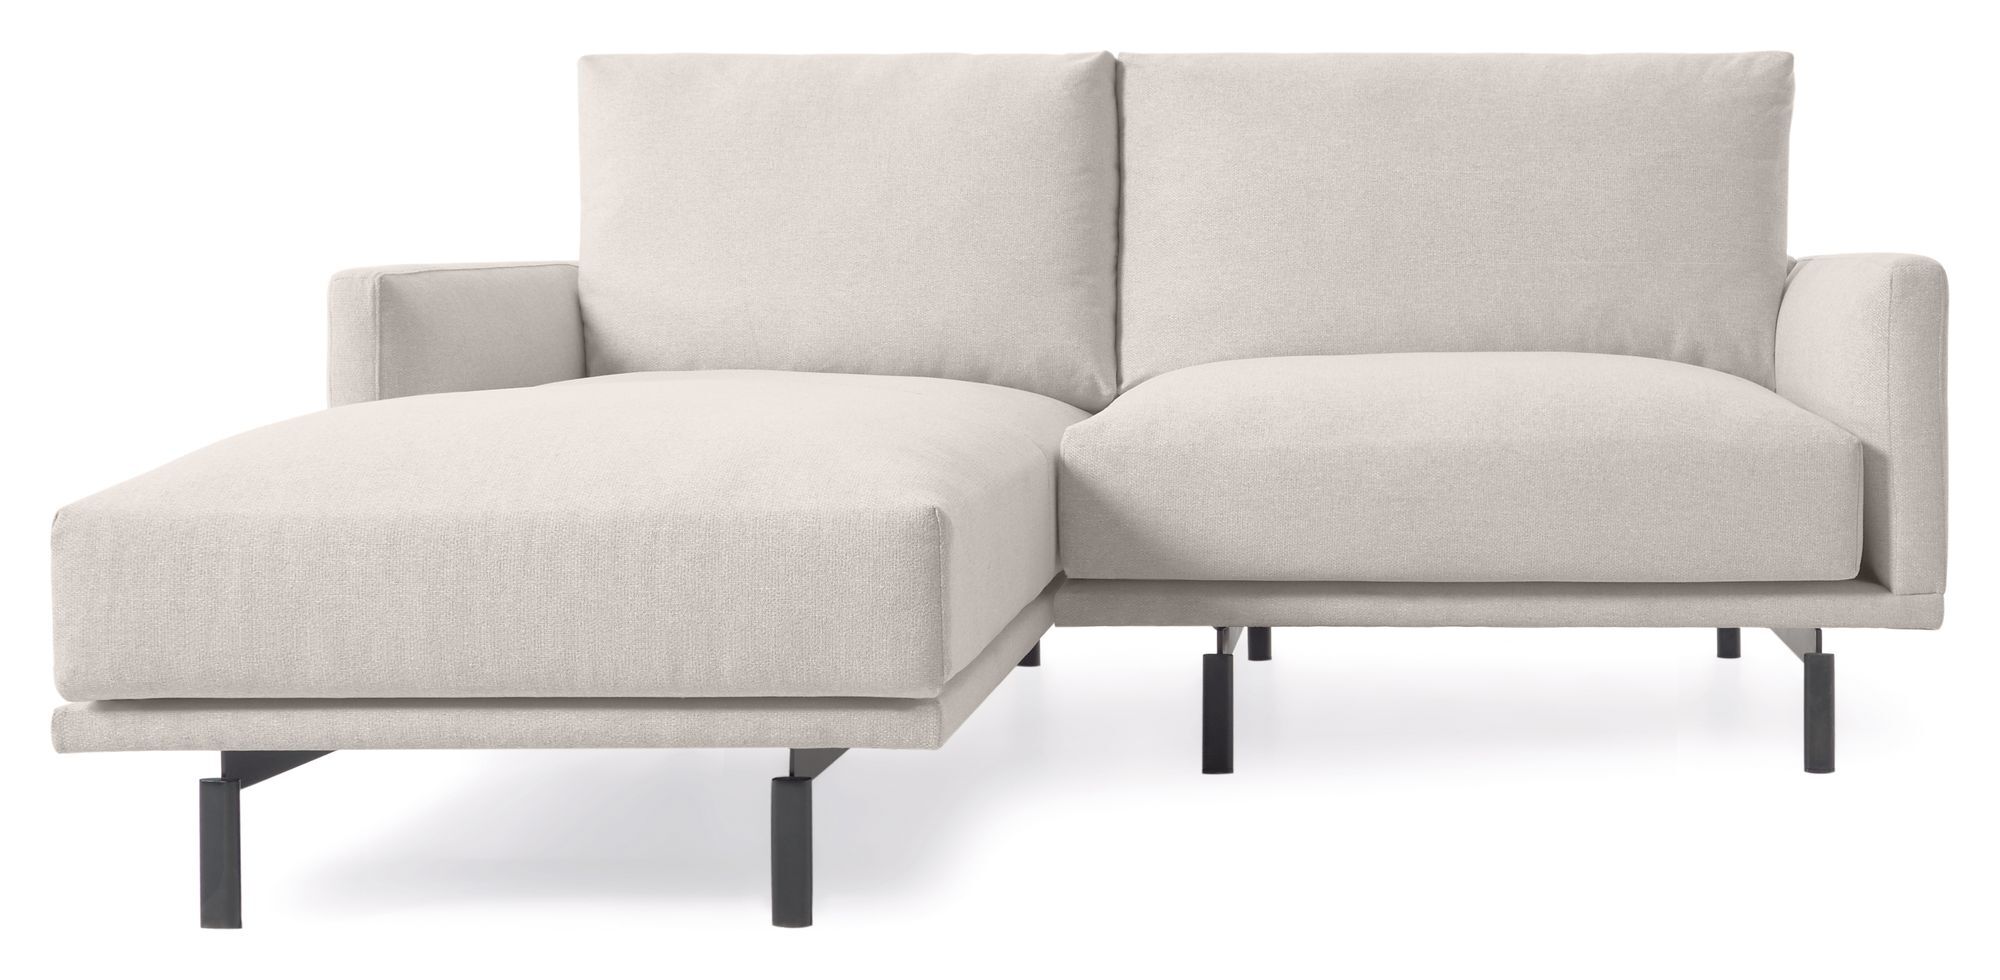 Kave Home Galene 3-pers. Sofa m. venstrevendt chaiselong, B194, Beige chenille   Unoliving